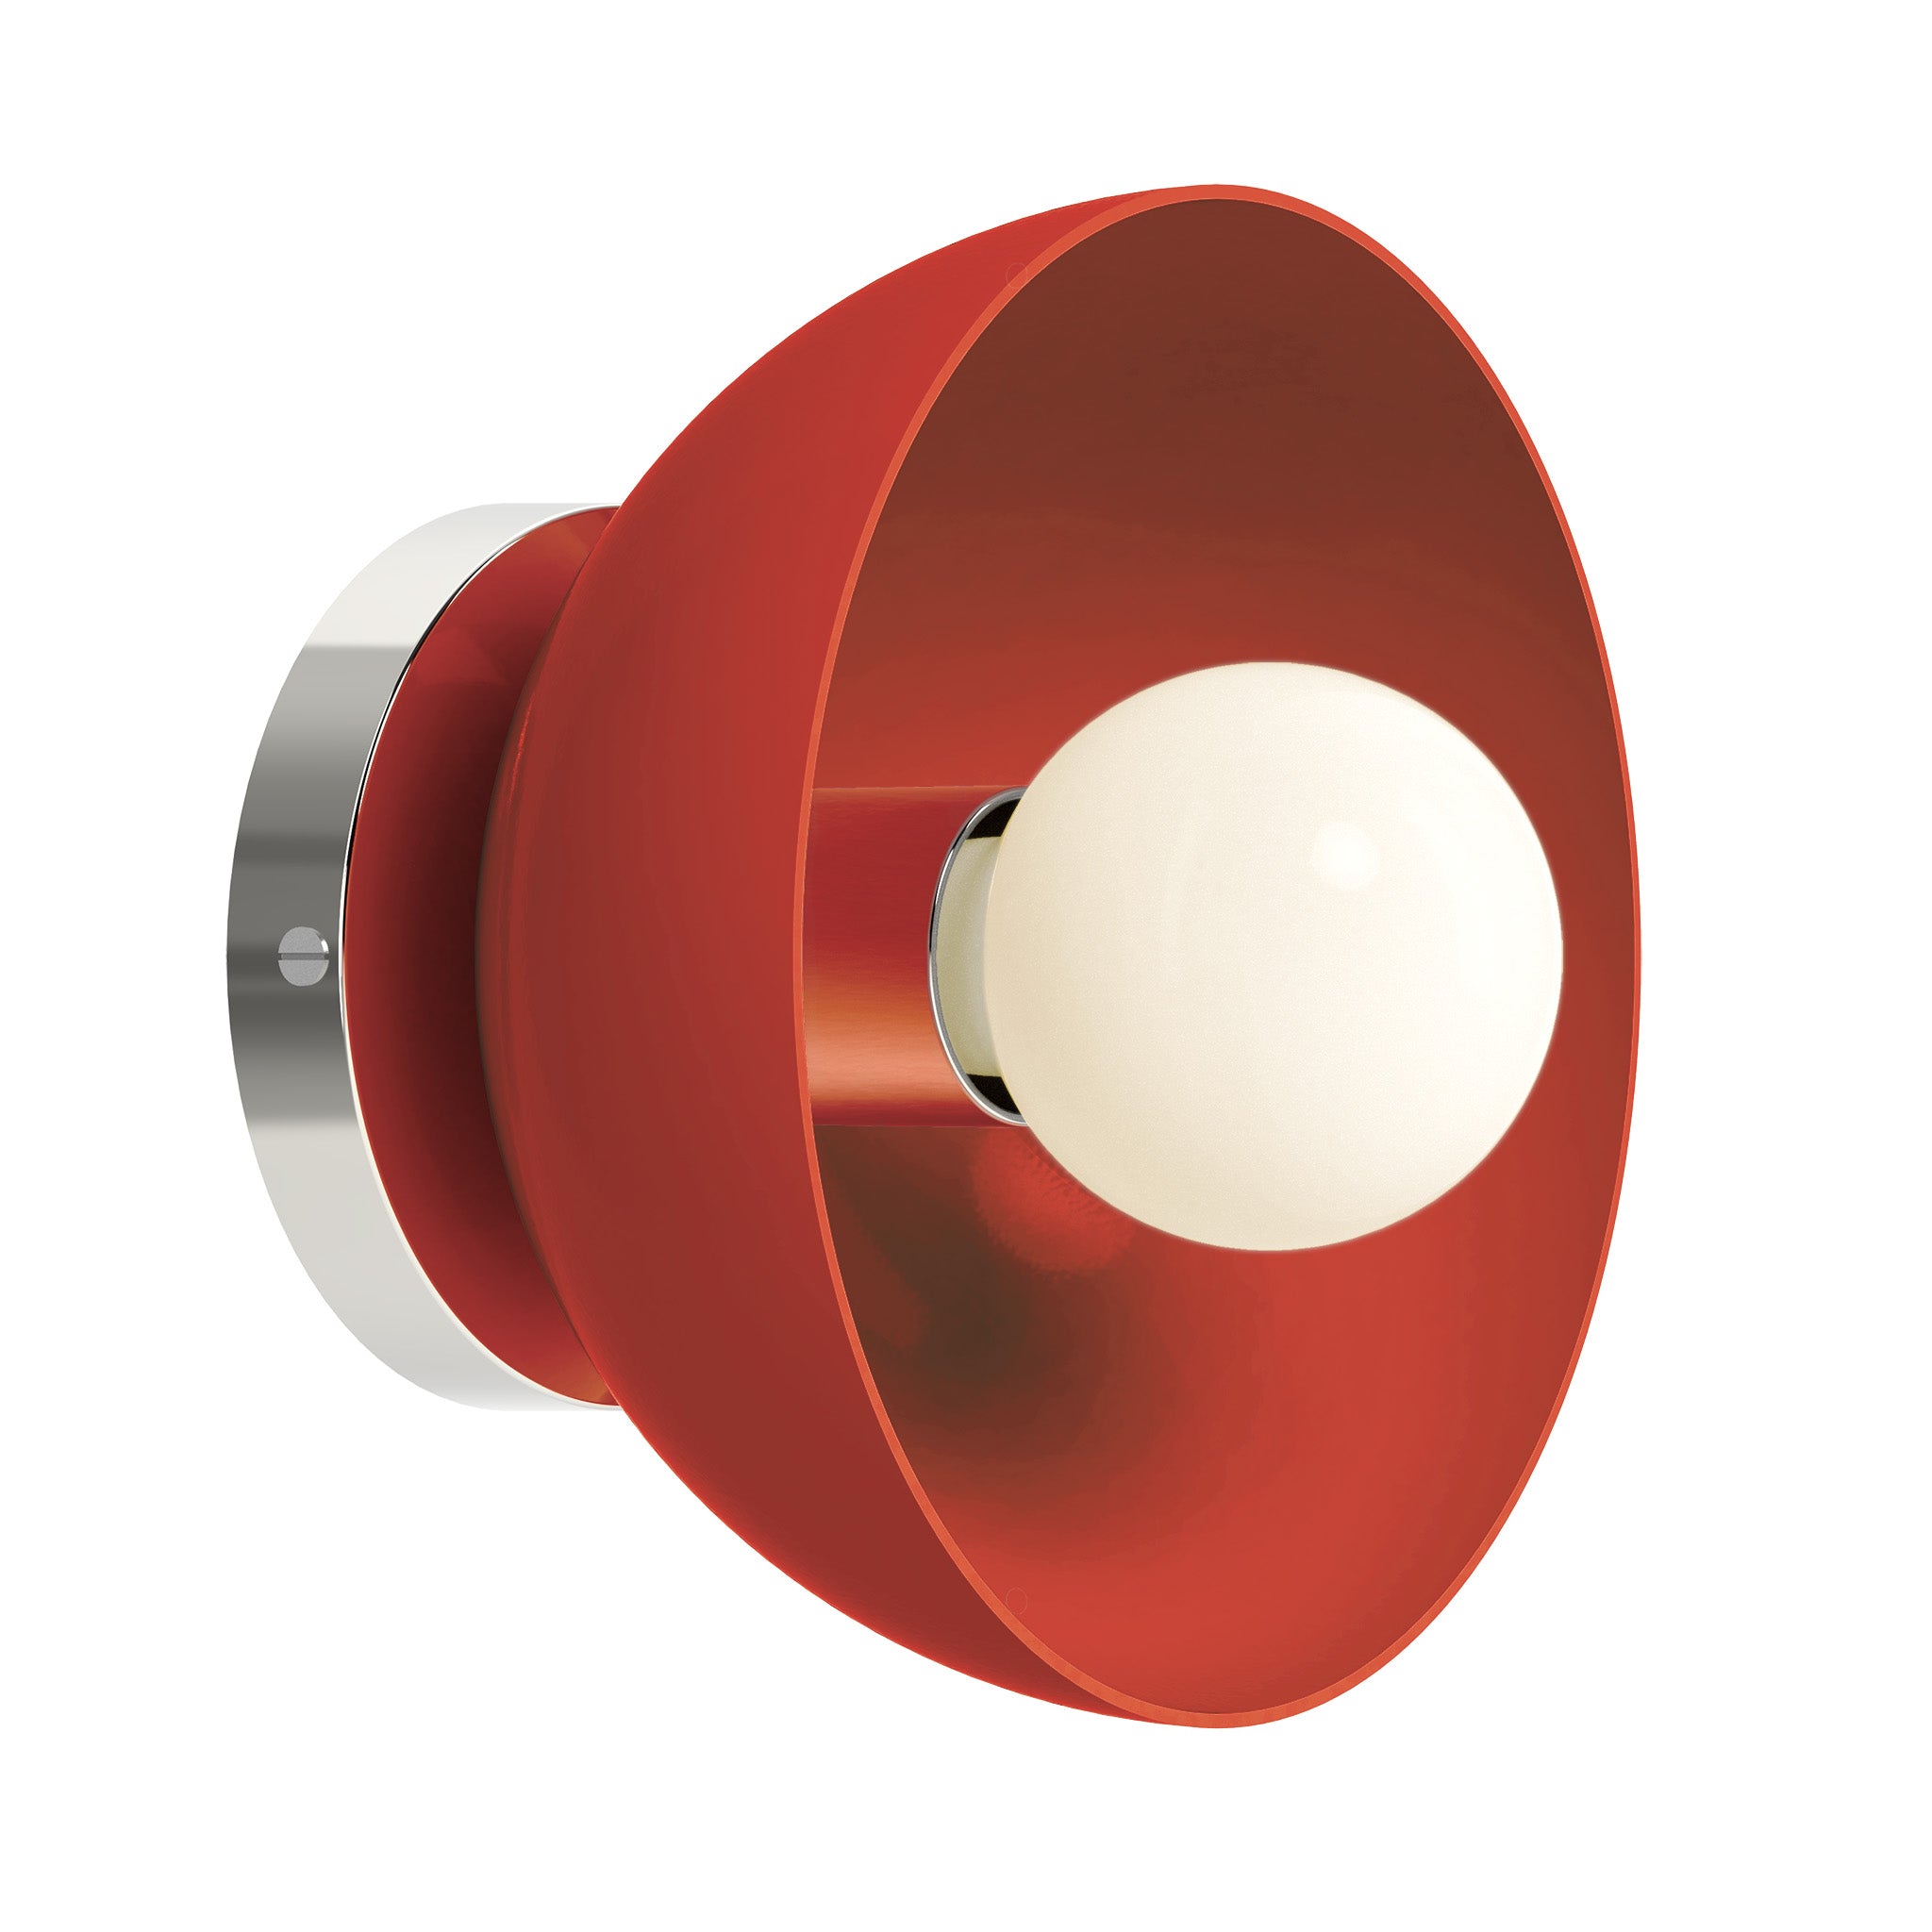 Nickel and riding hood red color Hemi sconce 8" Dutton Brown lighting